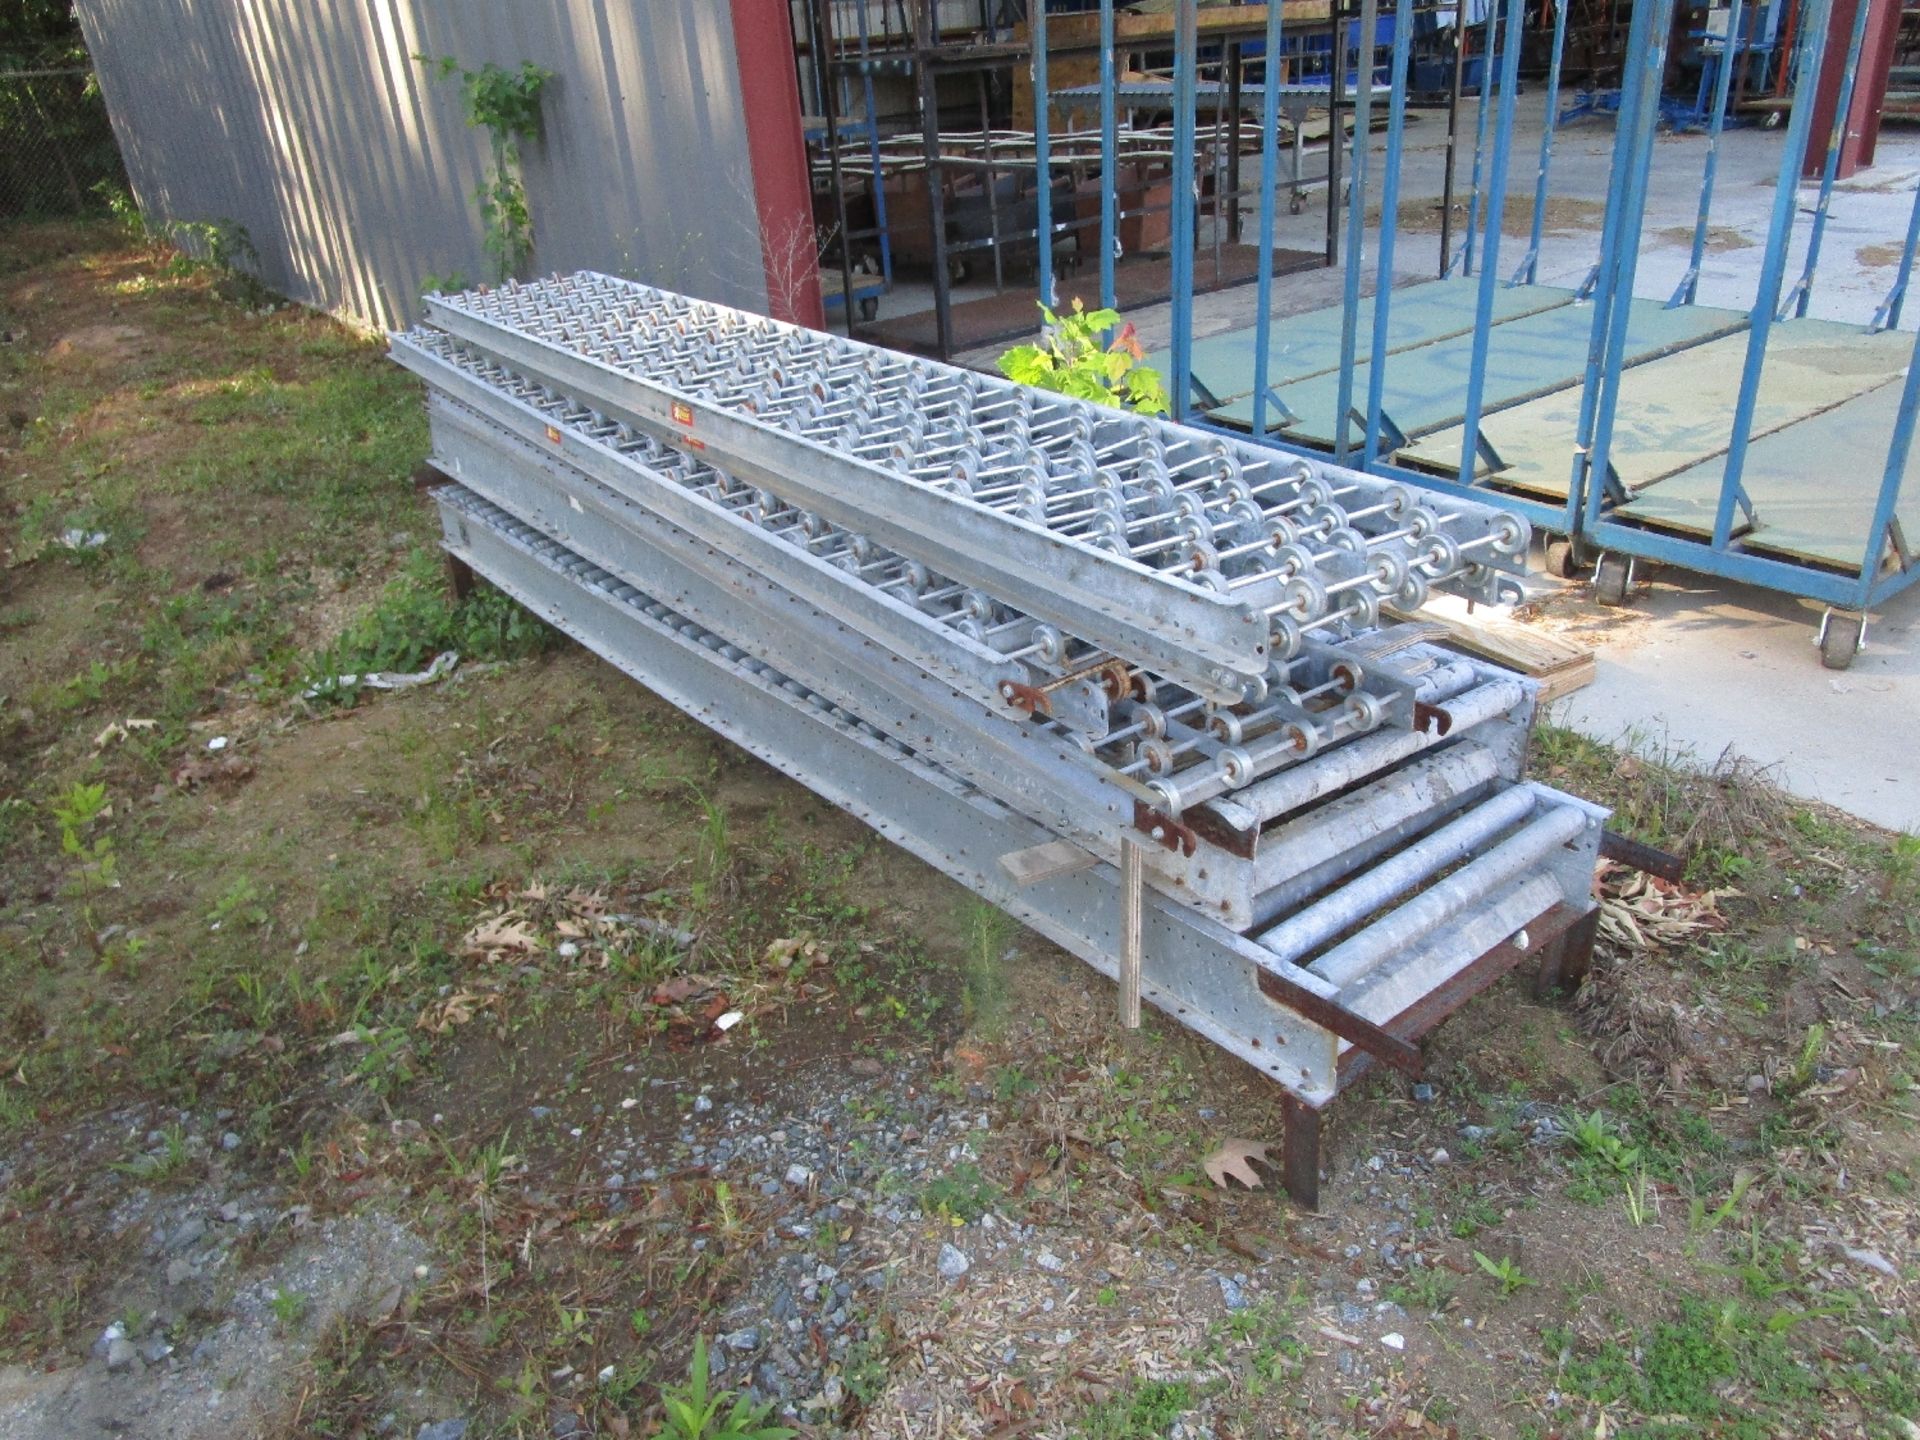 Hytrol Conveyor Sections with Legs - Image 4 of 4